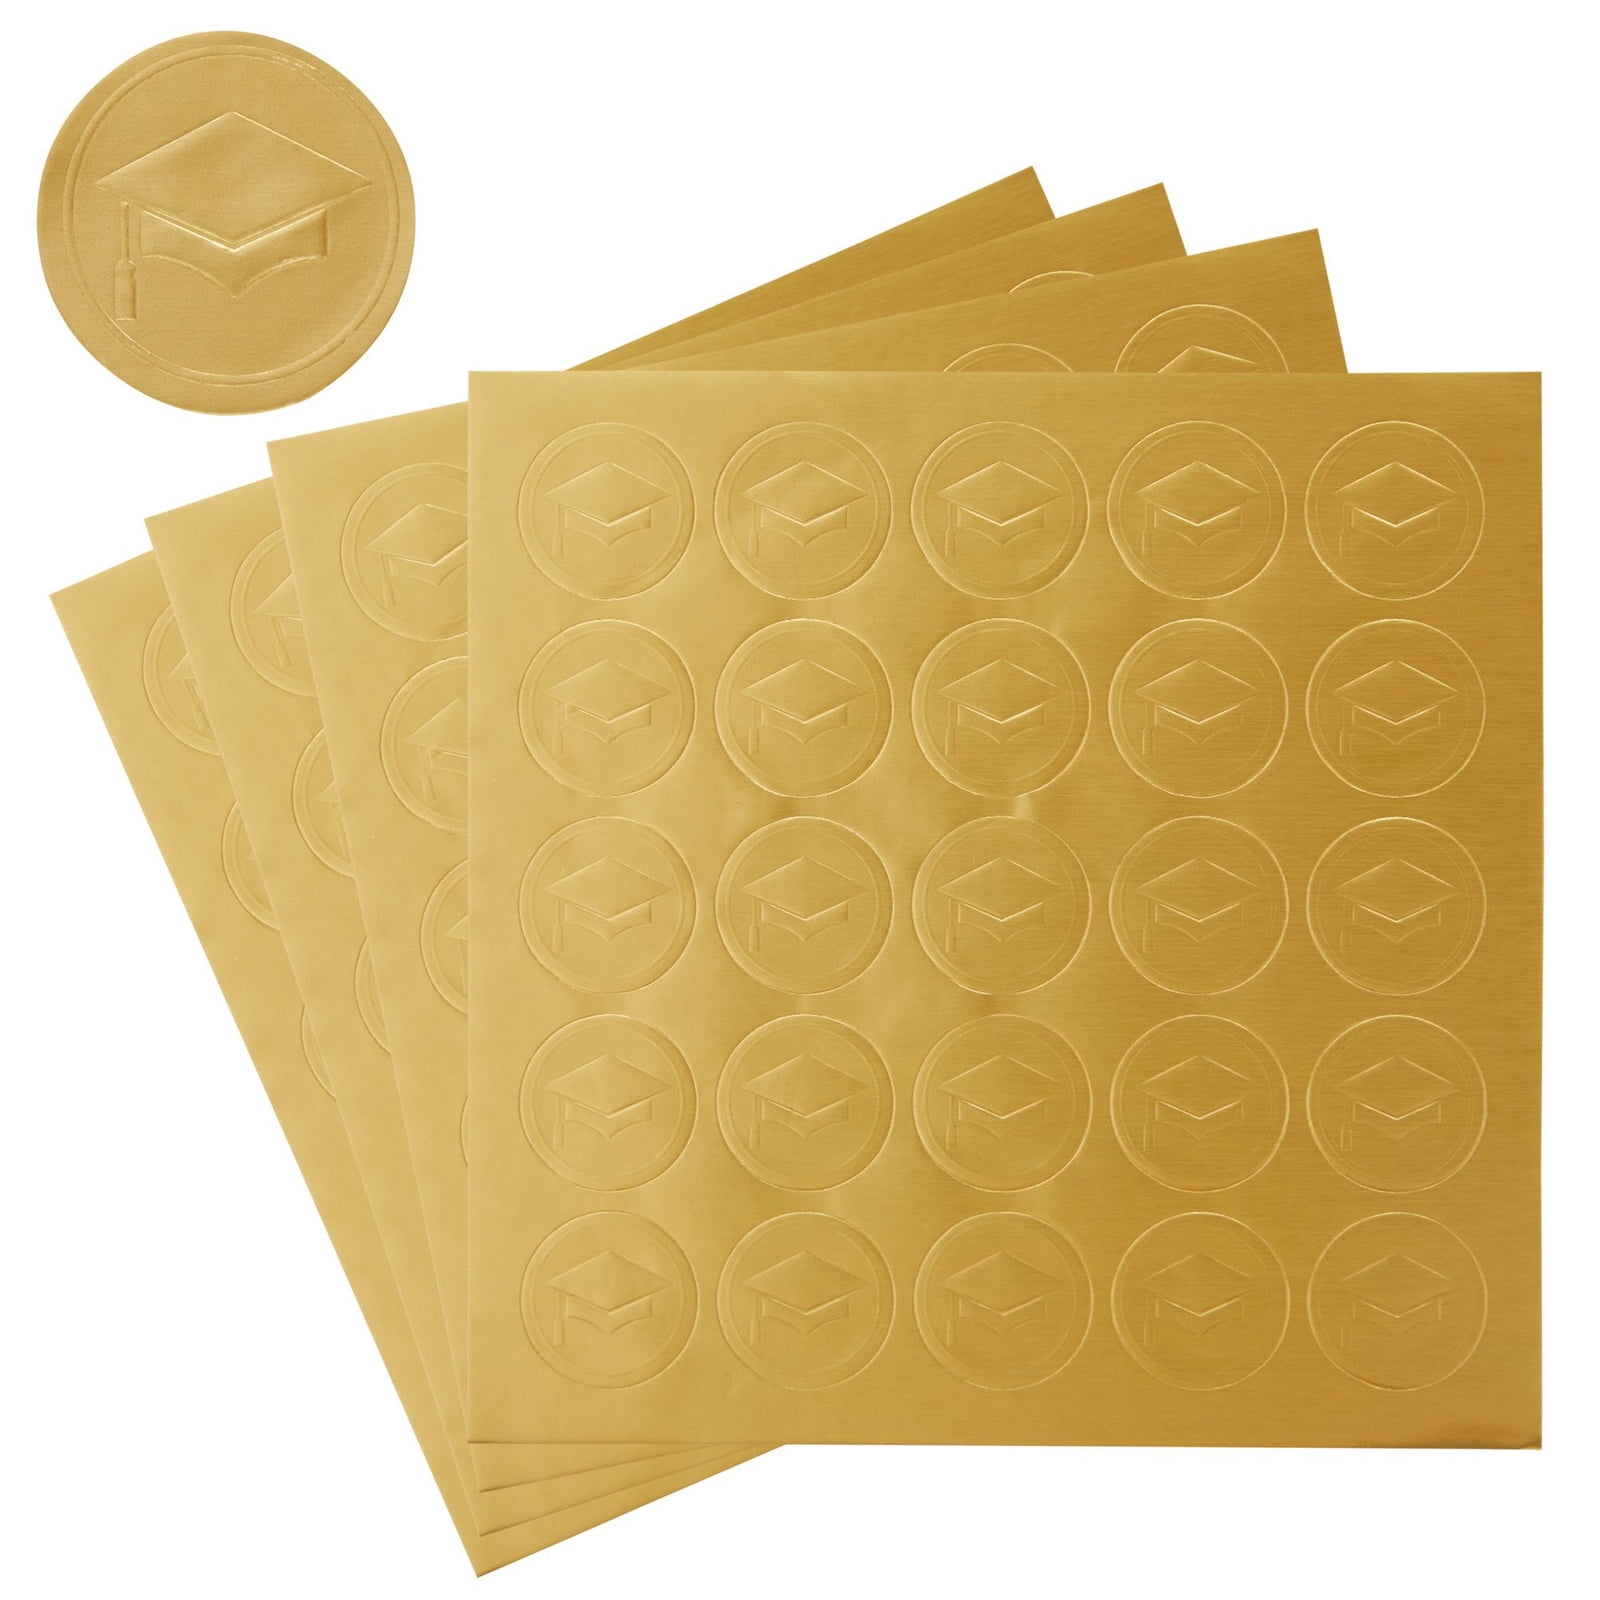 NEW 20 Embossed Foil Seals Gold Cross Envelope Announcements Cards Stickers 